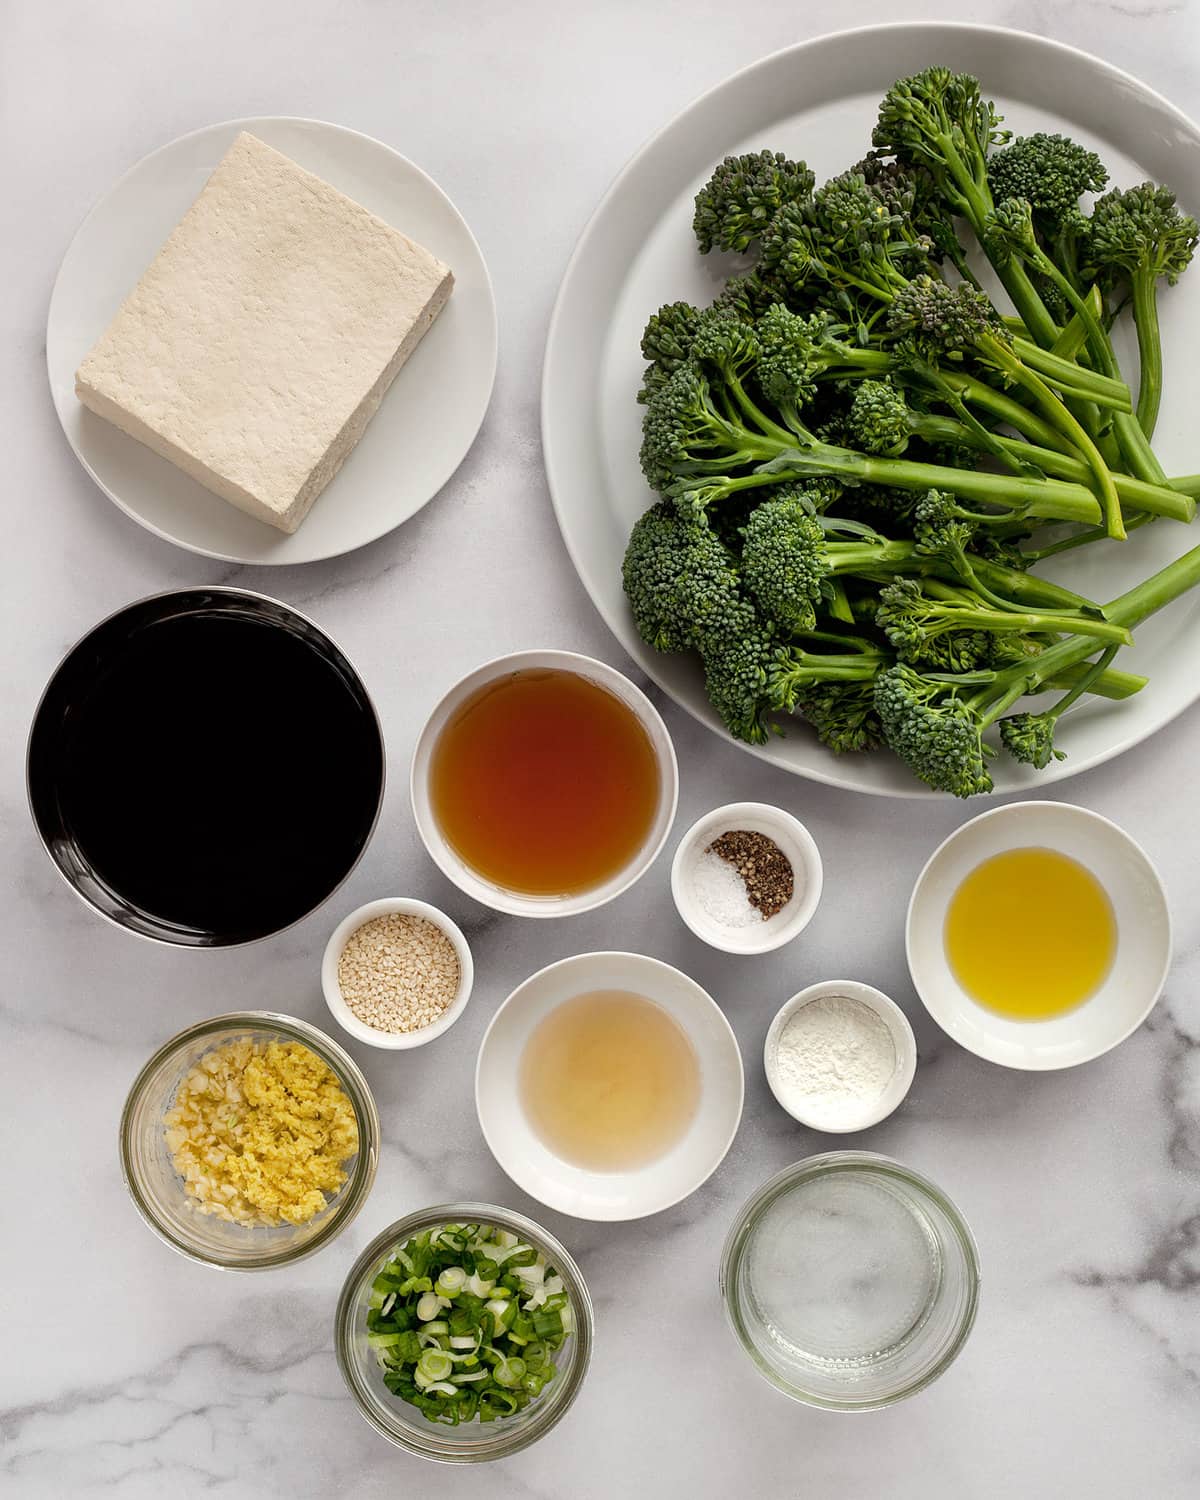 Ingredients including tofu, broccolini, soy sauce, garlic, ginger, oil, salt, pepper and maple syrup.